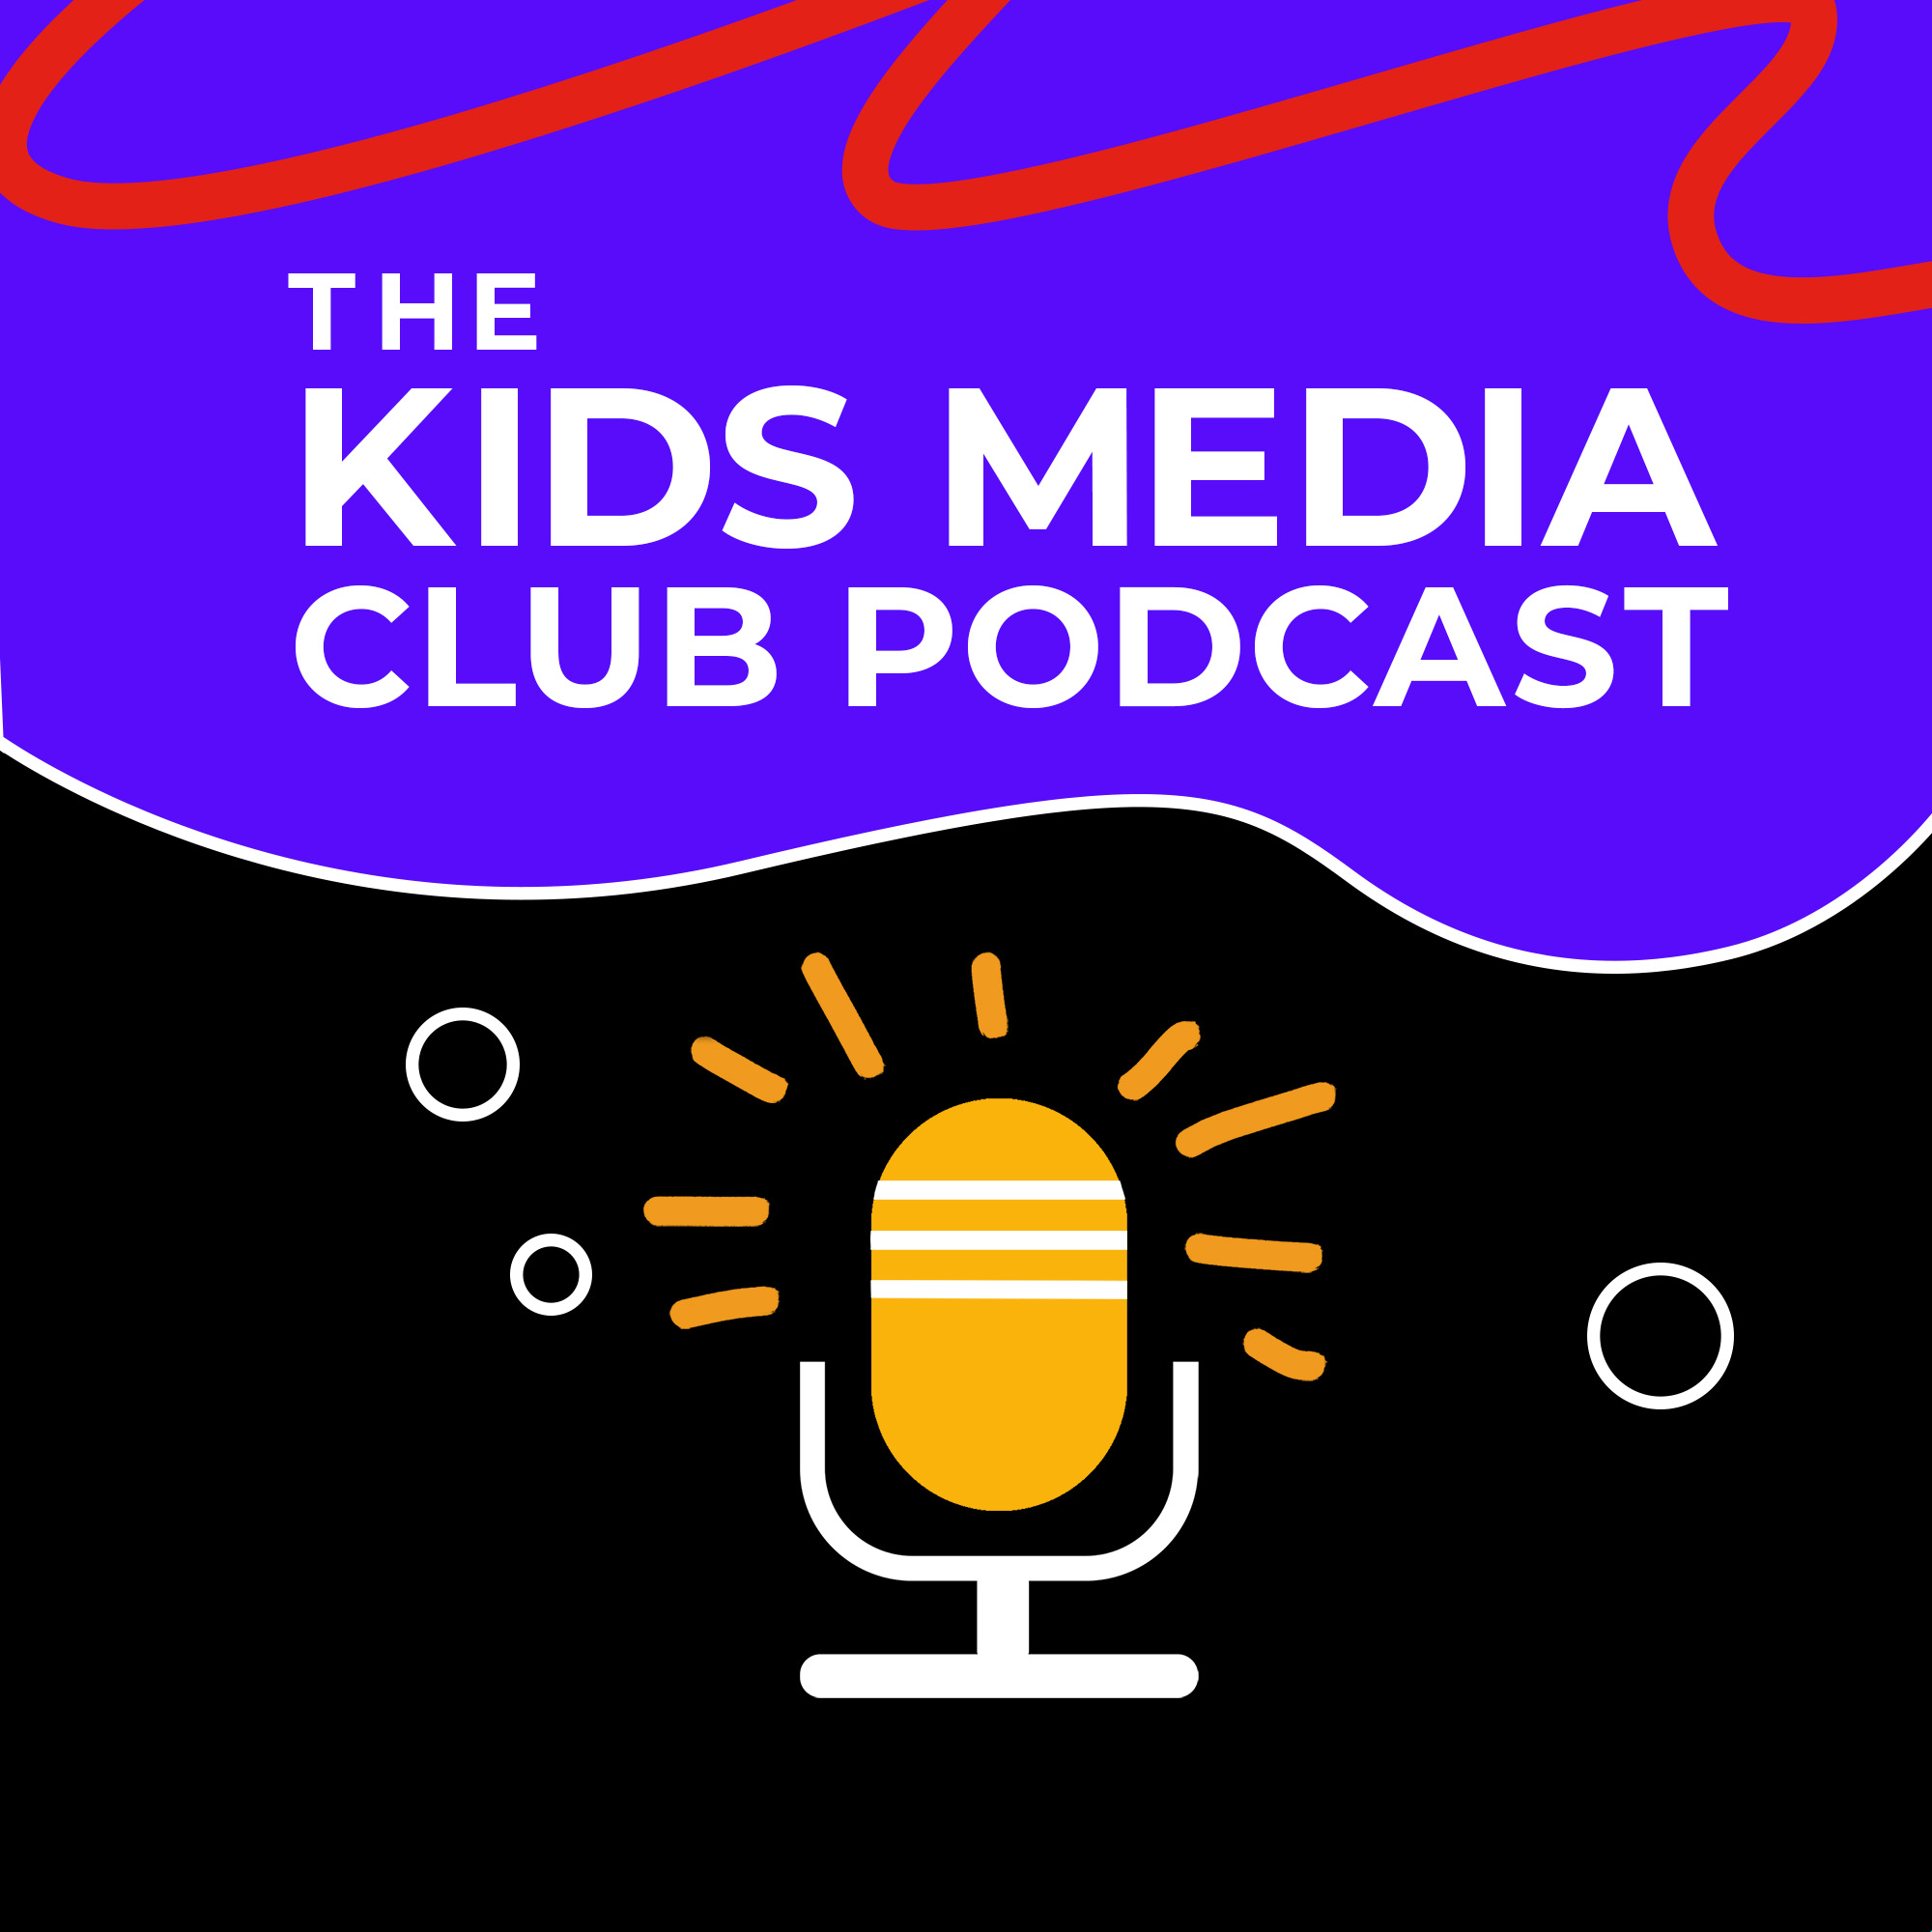 Kids Media Club Podcast: Industry Experts Share Tips for Succeeding on YouTube